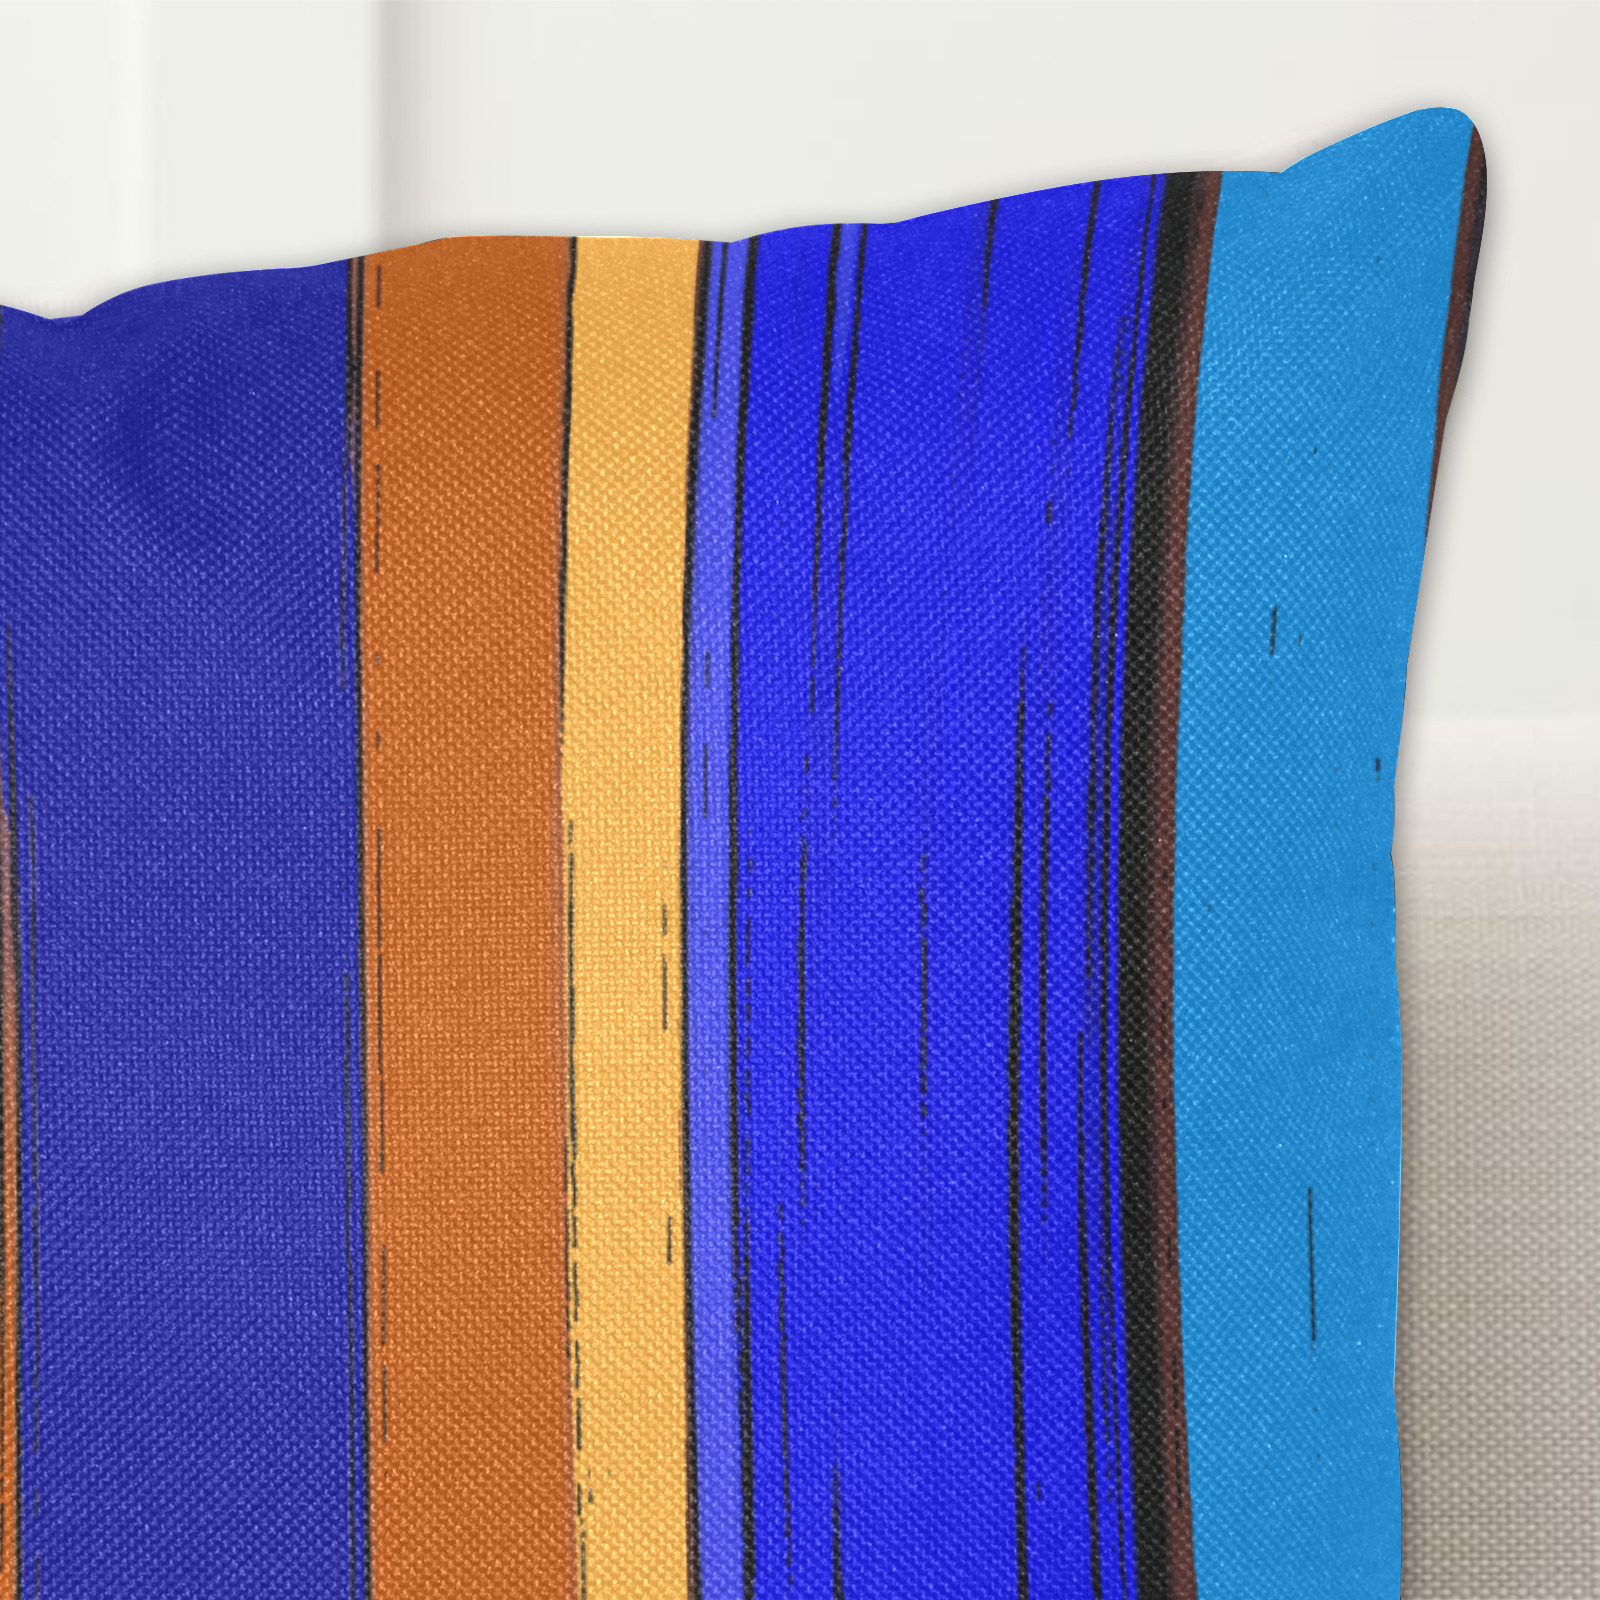 Abstract Blue And Orange 930 Linen Zippered Pillowcase 18"x18"(Two Sides)